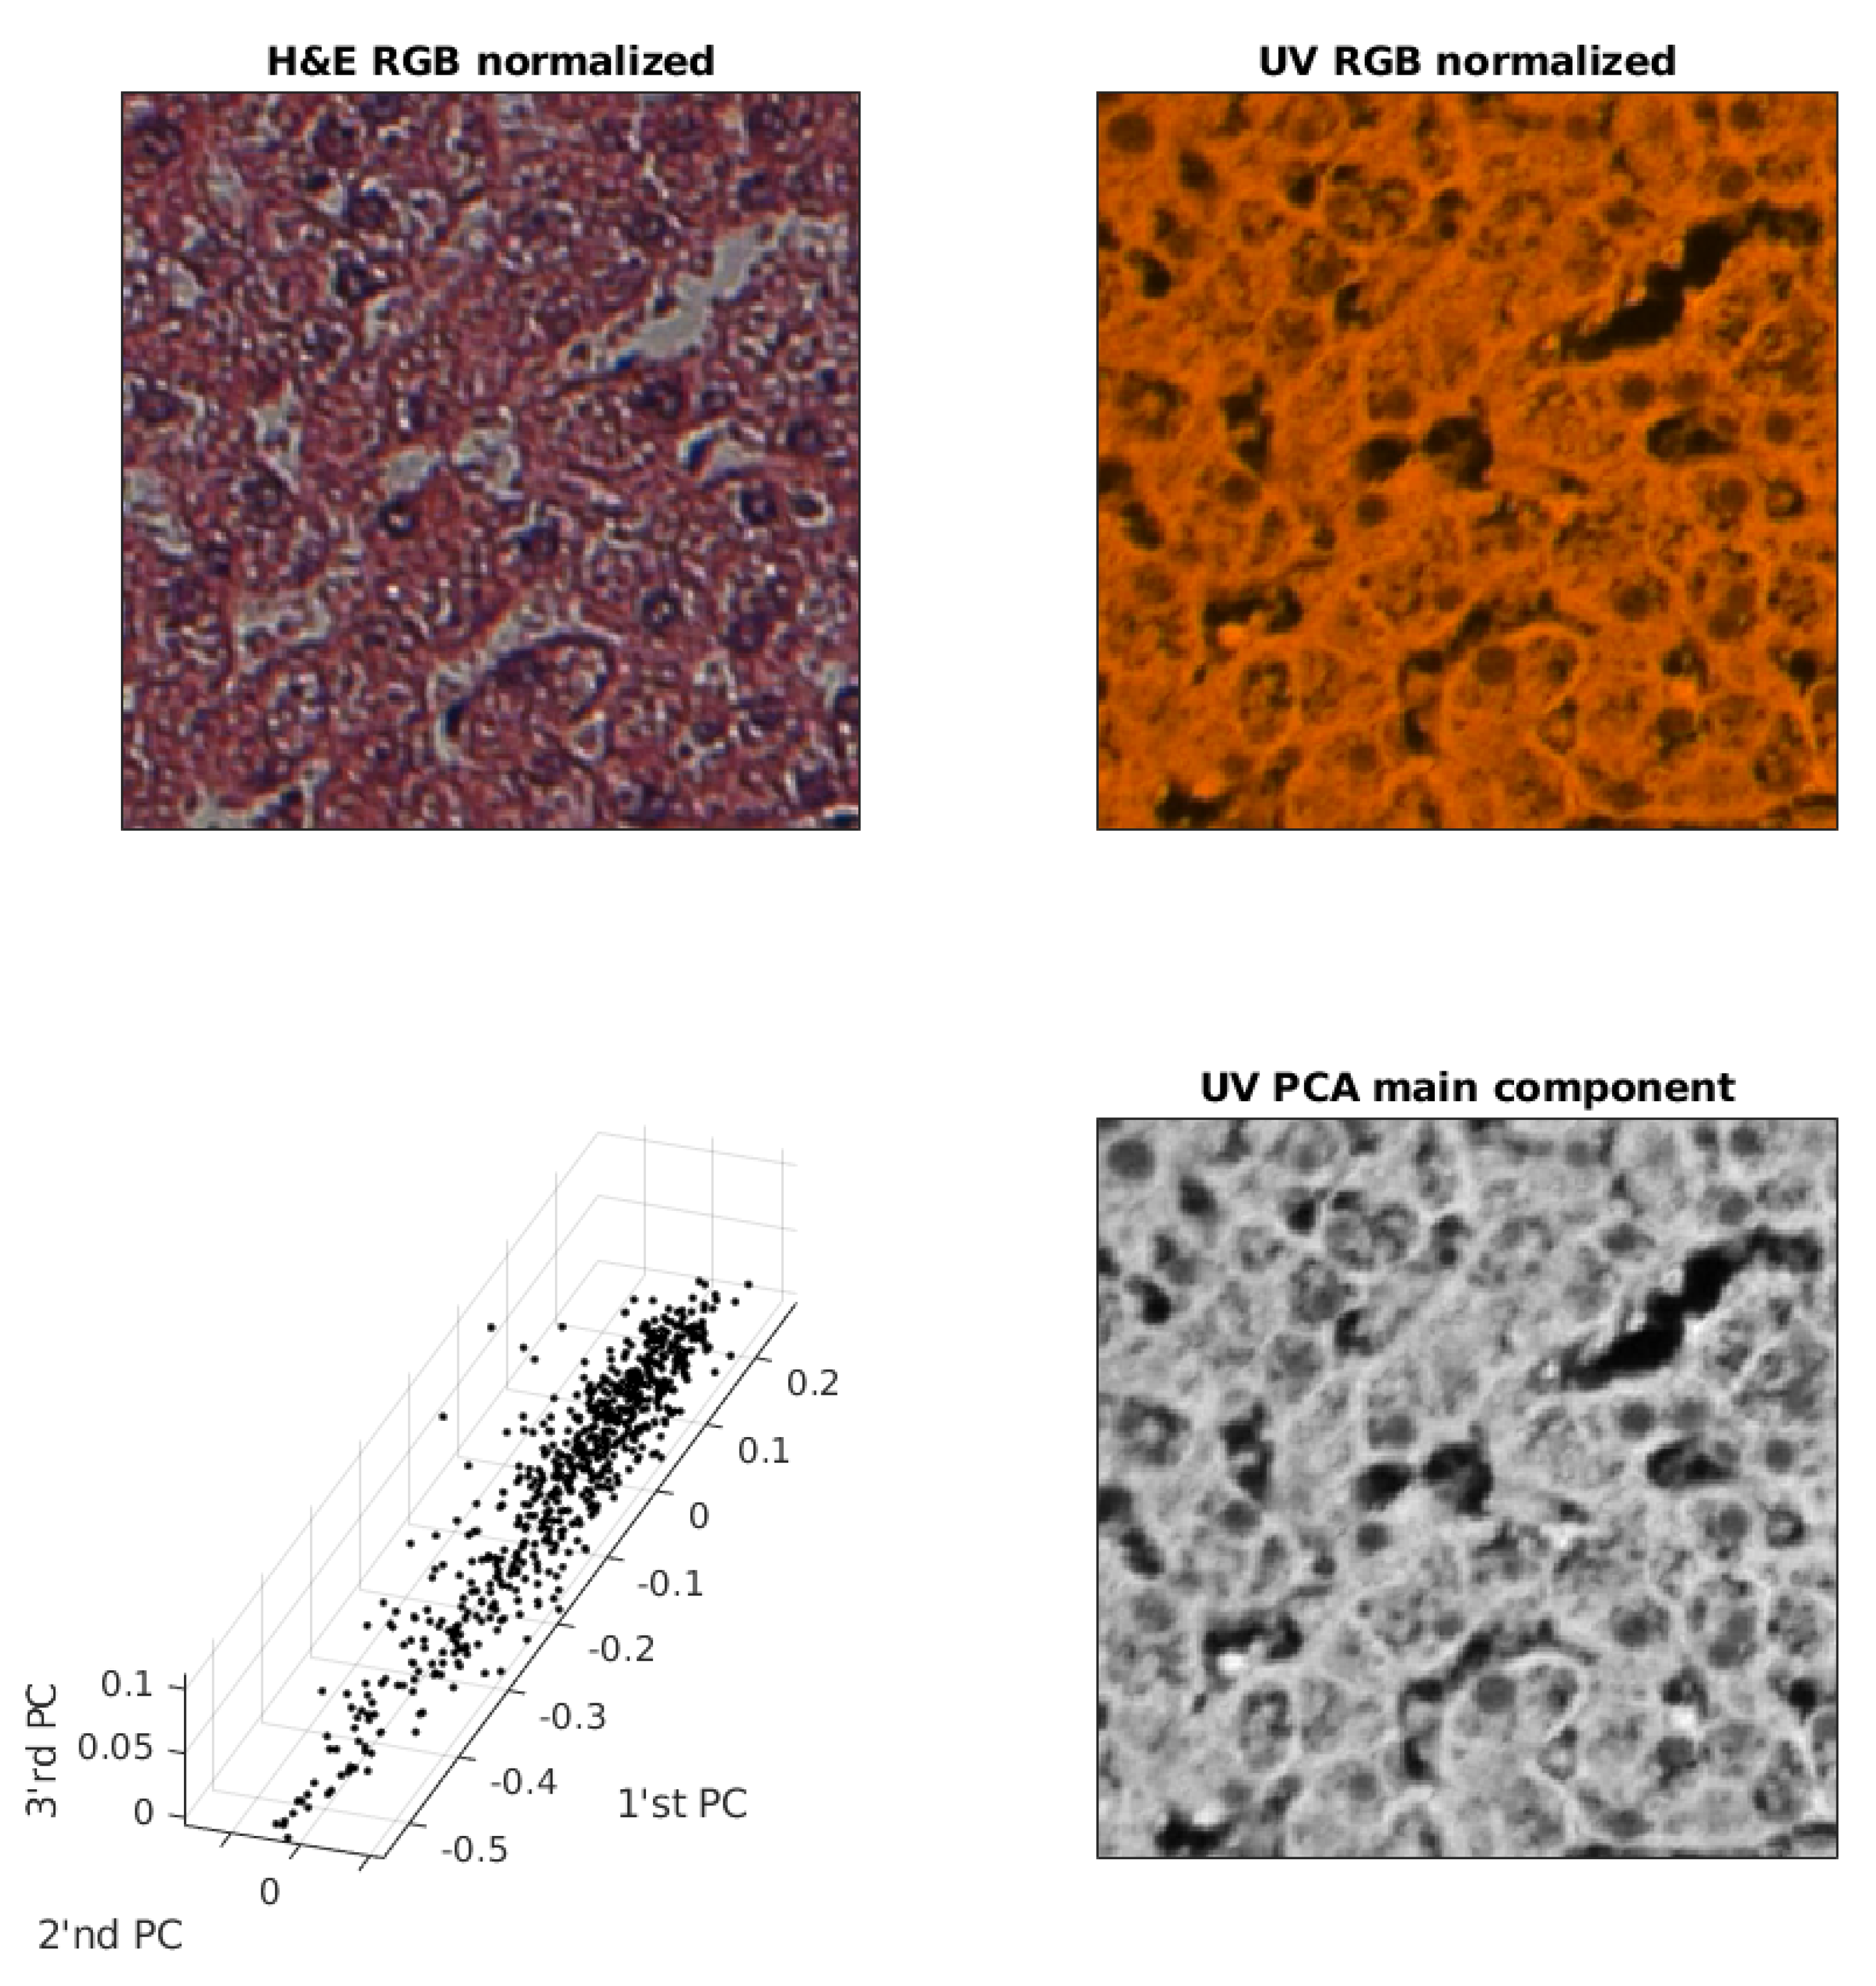 Applied Sciences Free Full Text Virtual Uv Fluorescence Microscopy From Hematoxylin And Eosin Staining Of Liver Images Using Deep Learning Convolutional Neural Network Html